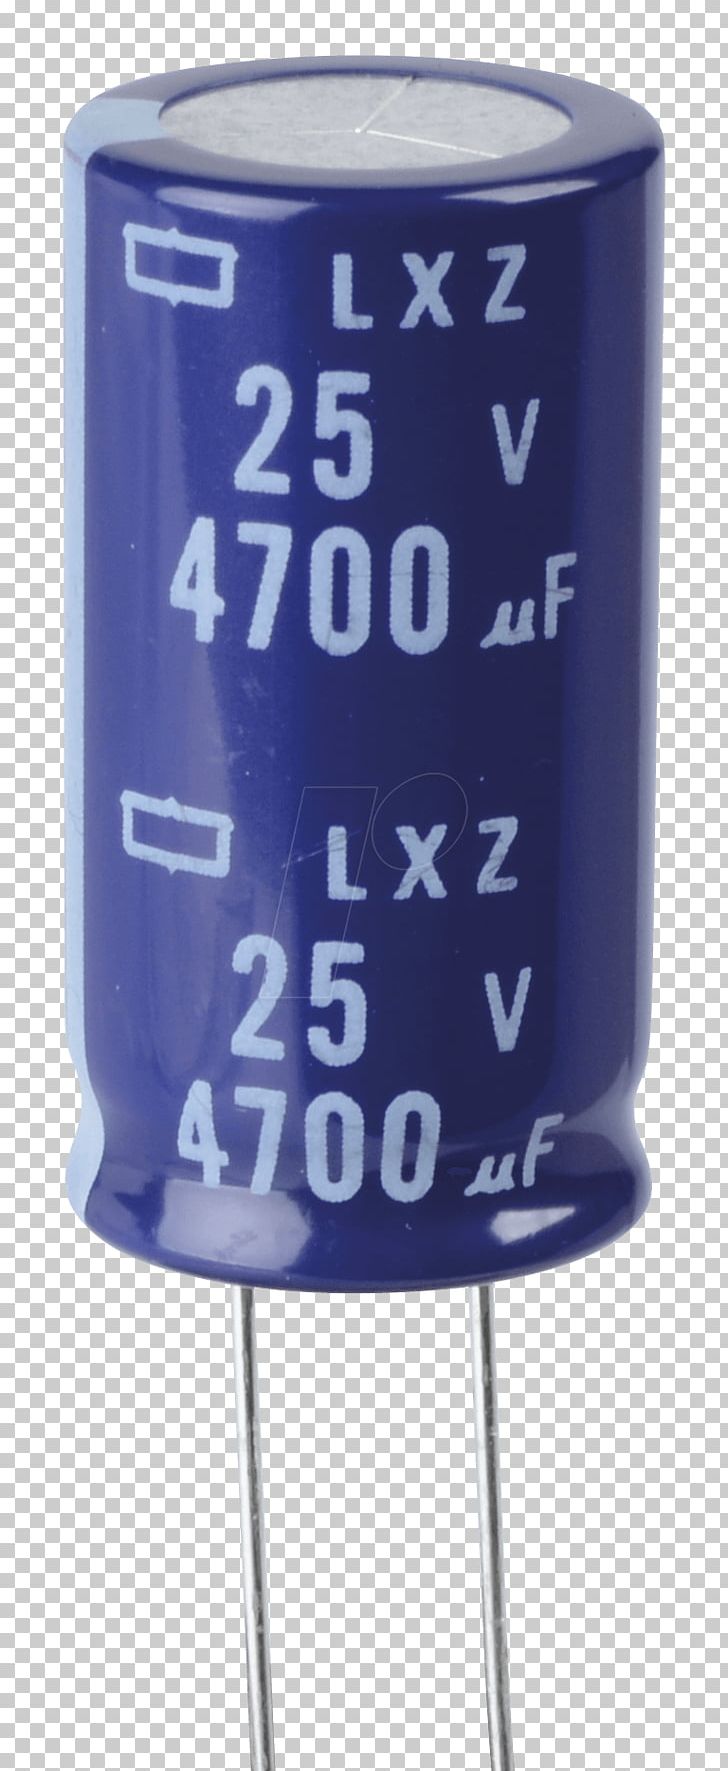 Electrolytic Capacitor Microfarad Europe Chemi-Con (Deutschland) GmbH C-rad PNG, Clipart, Capacitor, Circuit Component, Crad, Electrolyte, Electrolytic Capacitor Free PNG Download